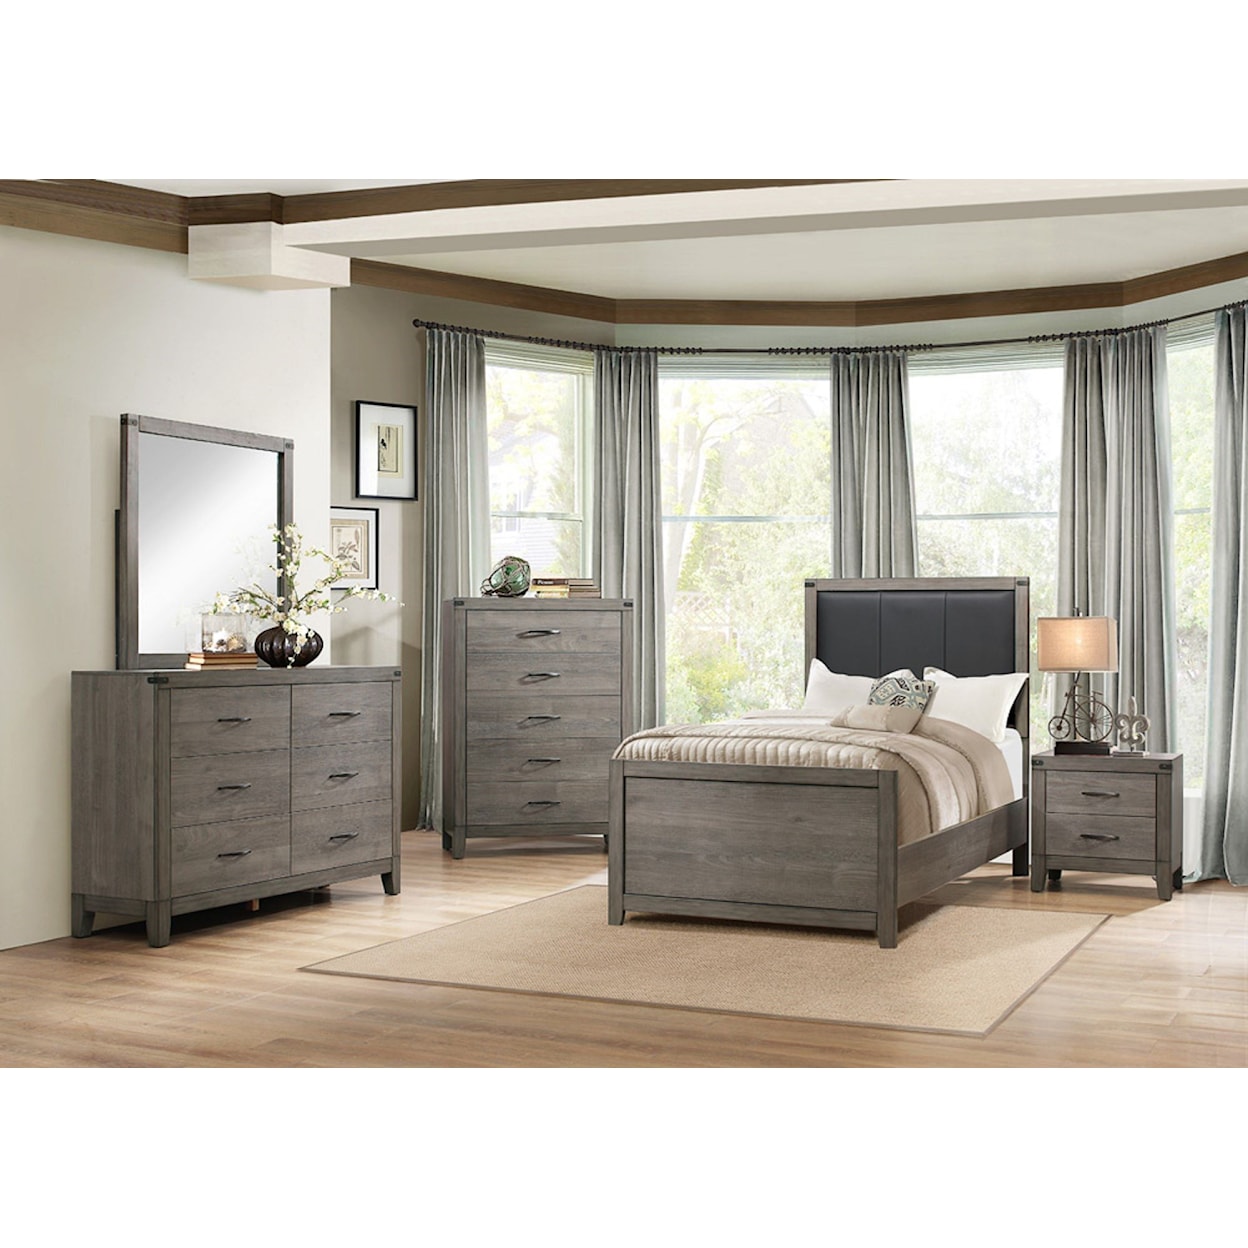 Homelegance 2042 Contemporary Twin Bedroom Group